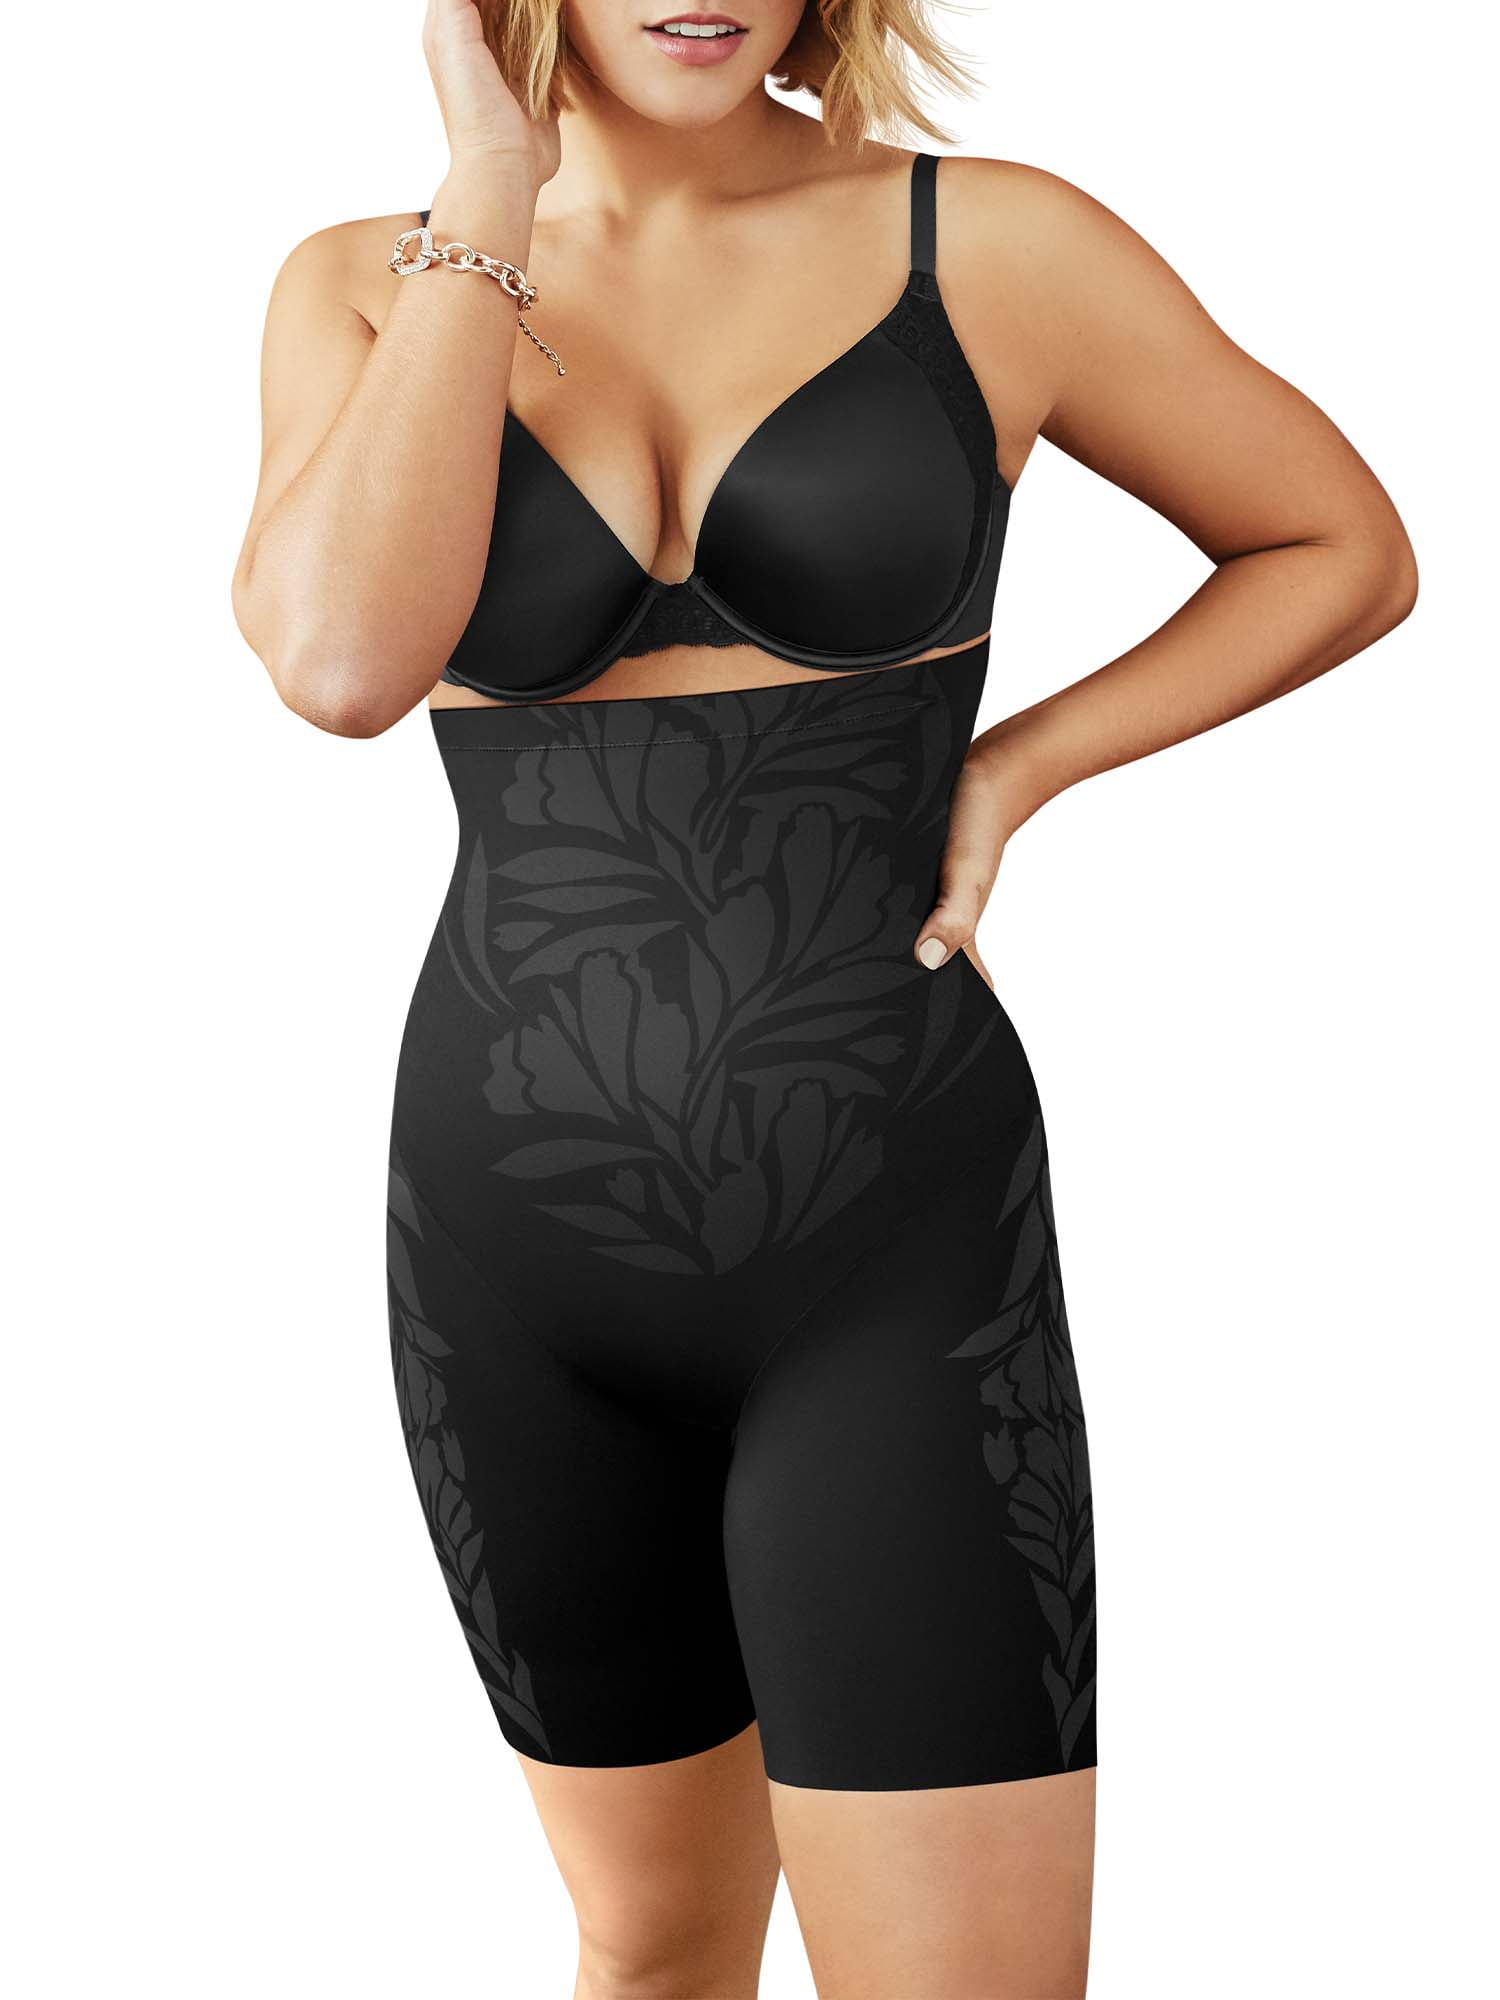 Introducing Maidenform Shapewear powered by LYCRA® FitSense™ technology